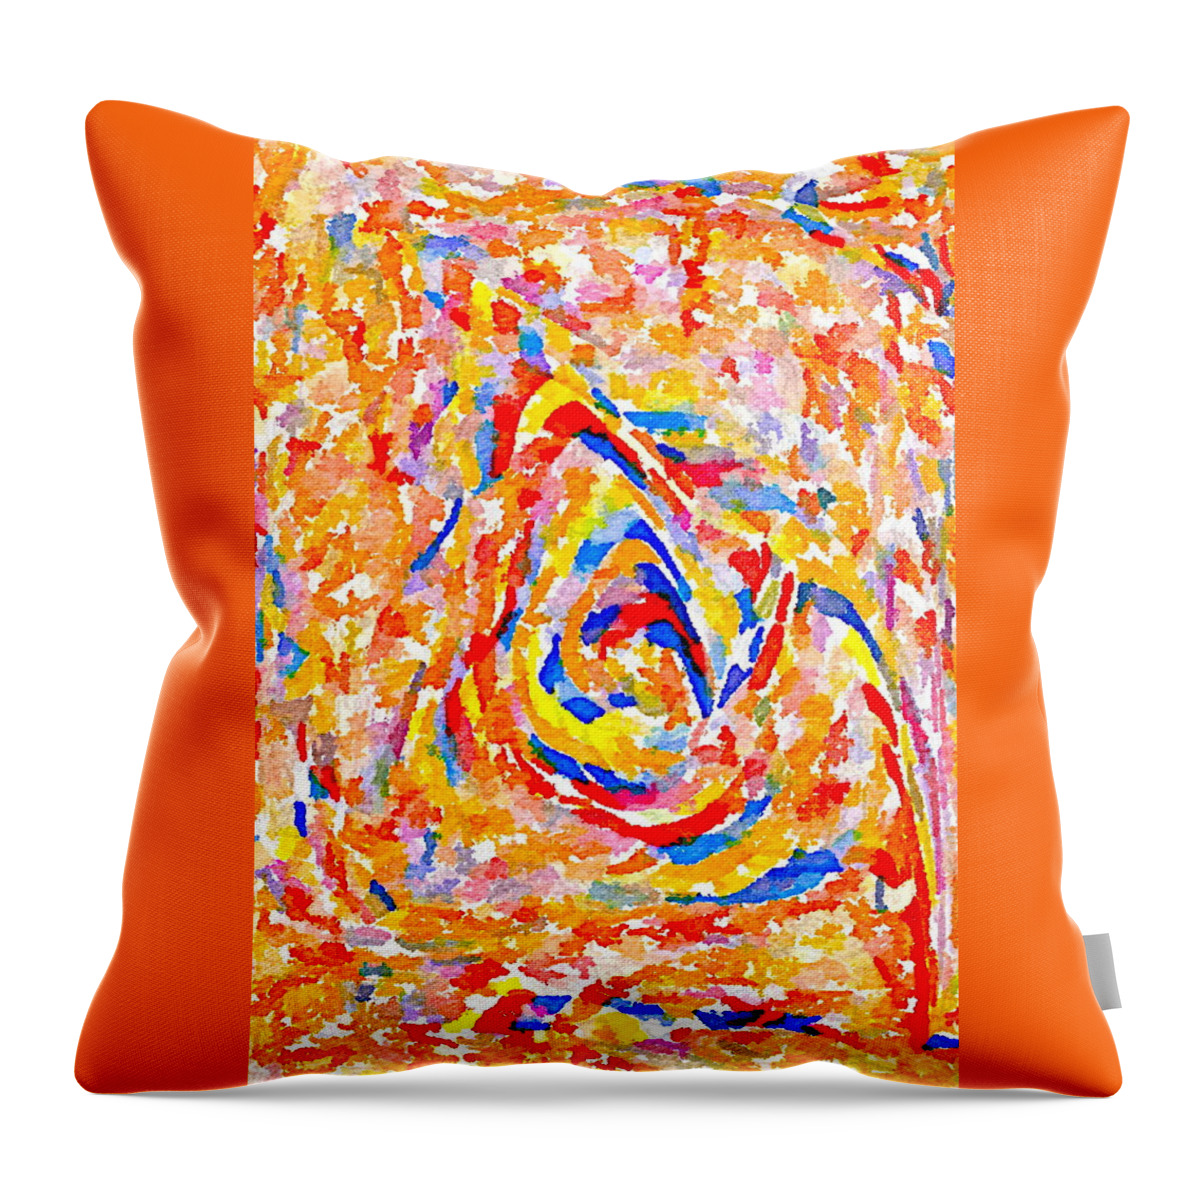 Abstract Art Throw Pillow featuring the digital art Inward by Artcetera By LizMac